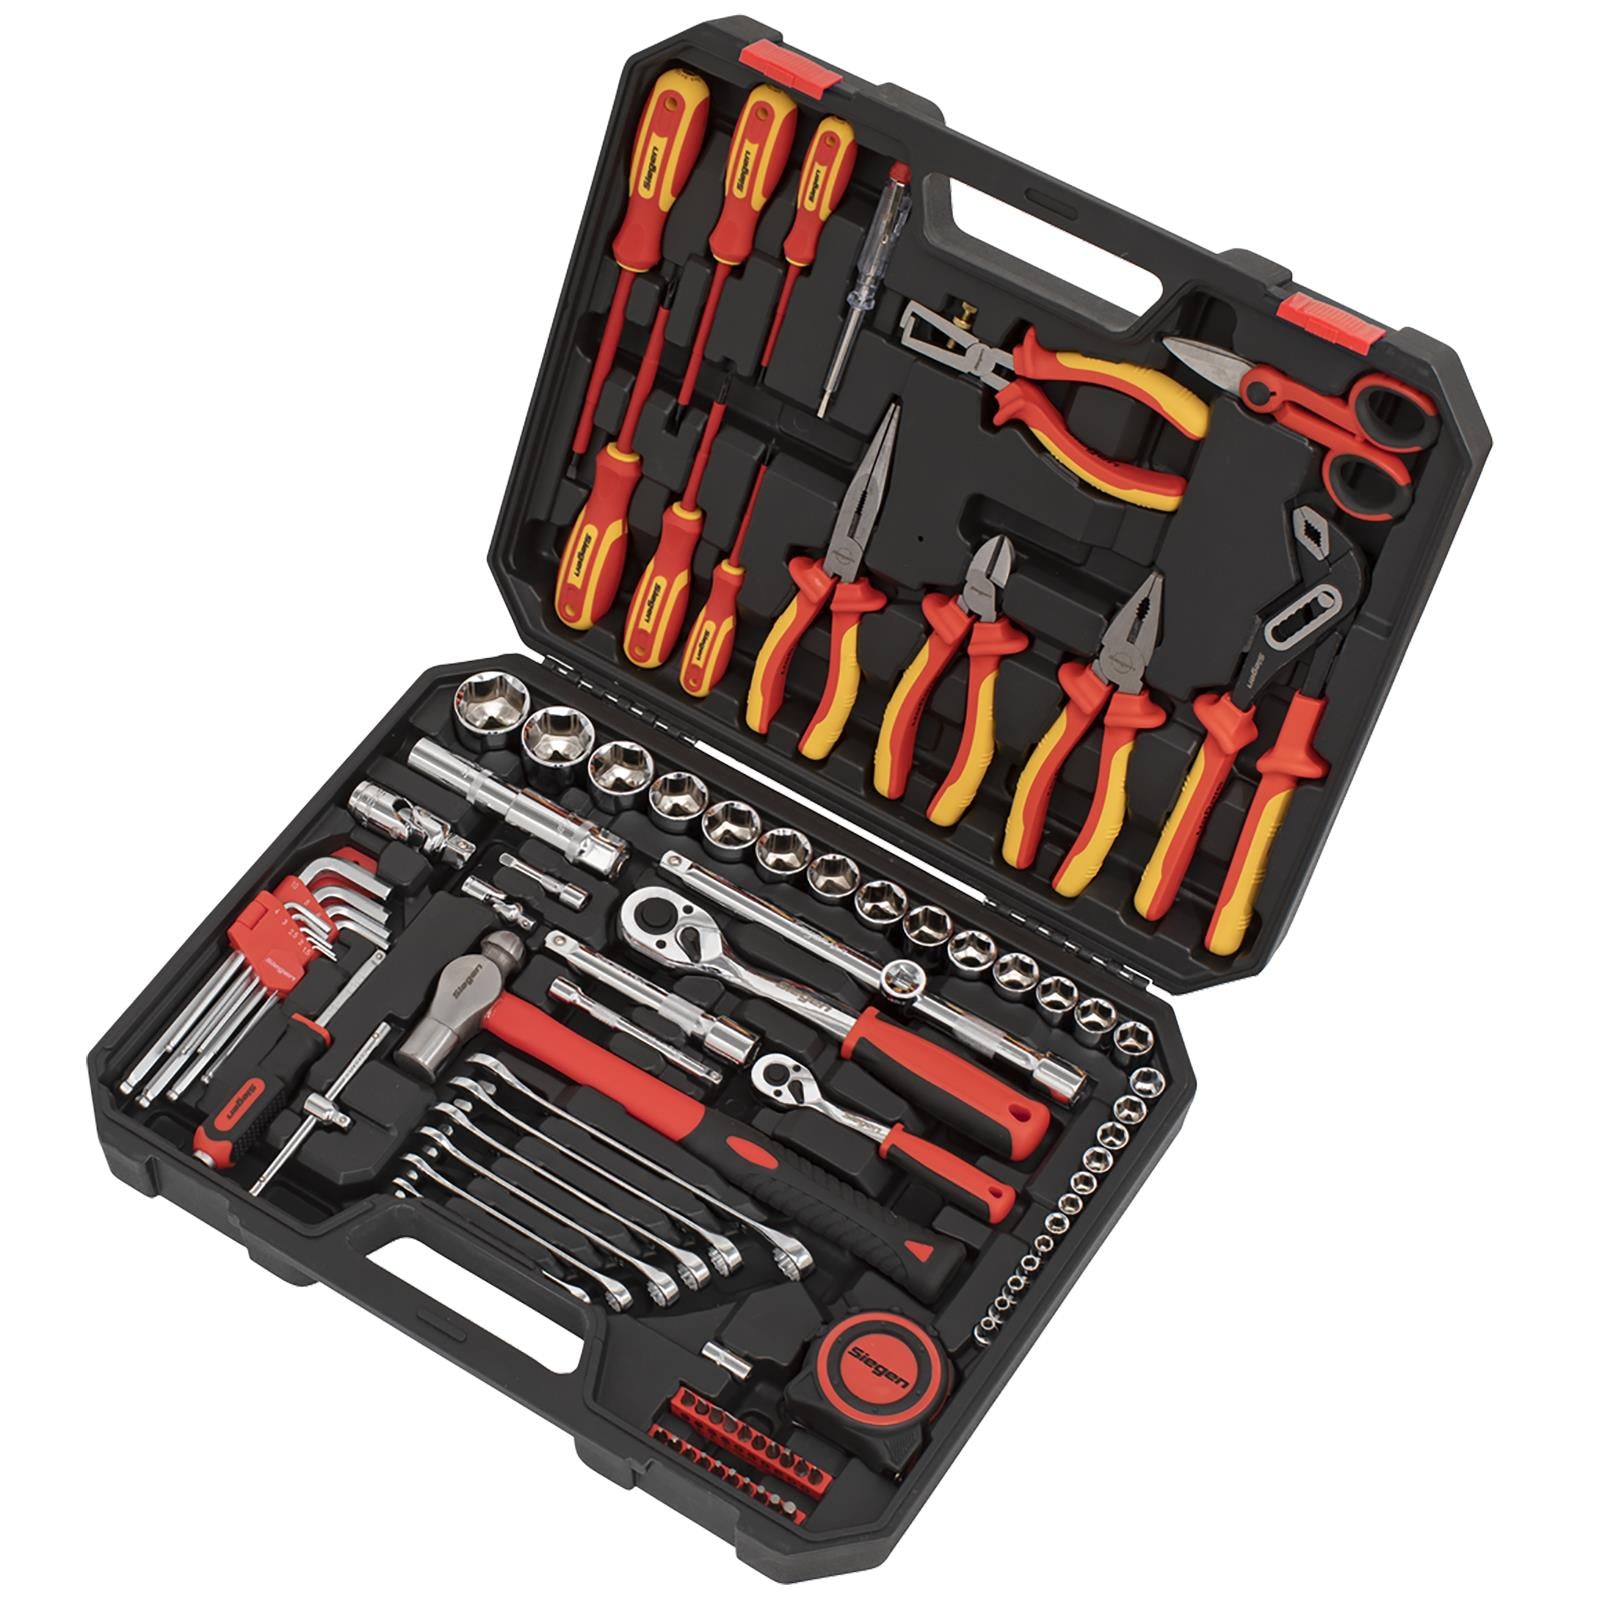 Siegen by Sealey Electrician's Tool Kit 90 Piece VDE Approved Pliers and Screwdrivers